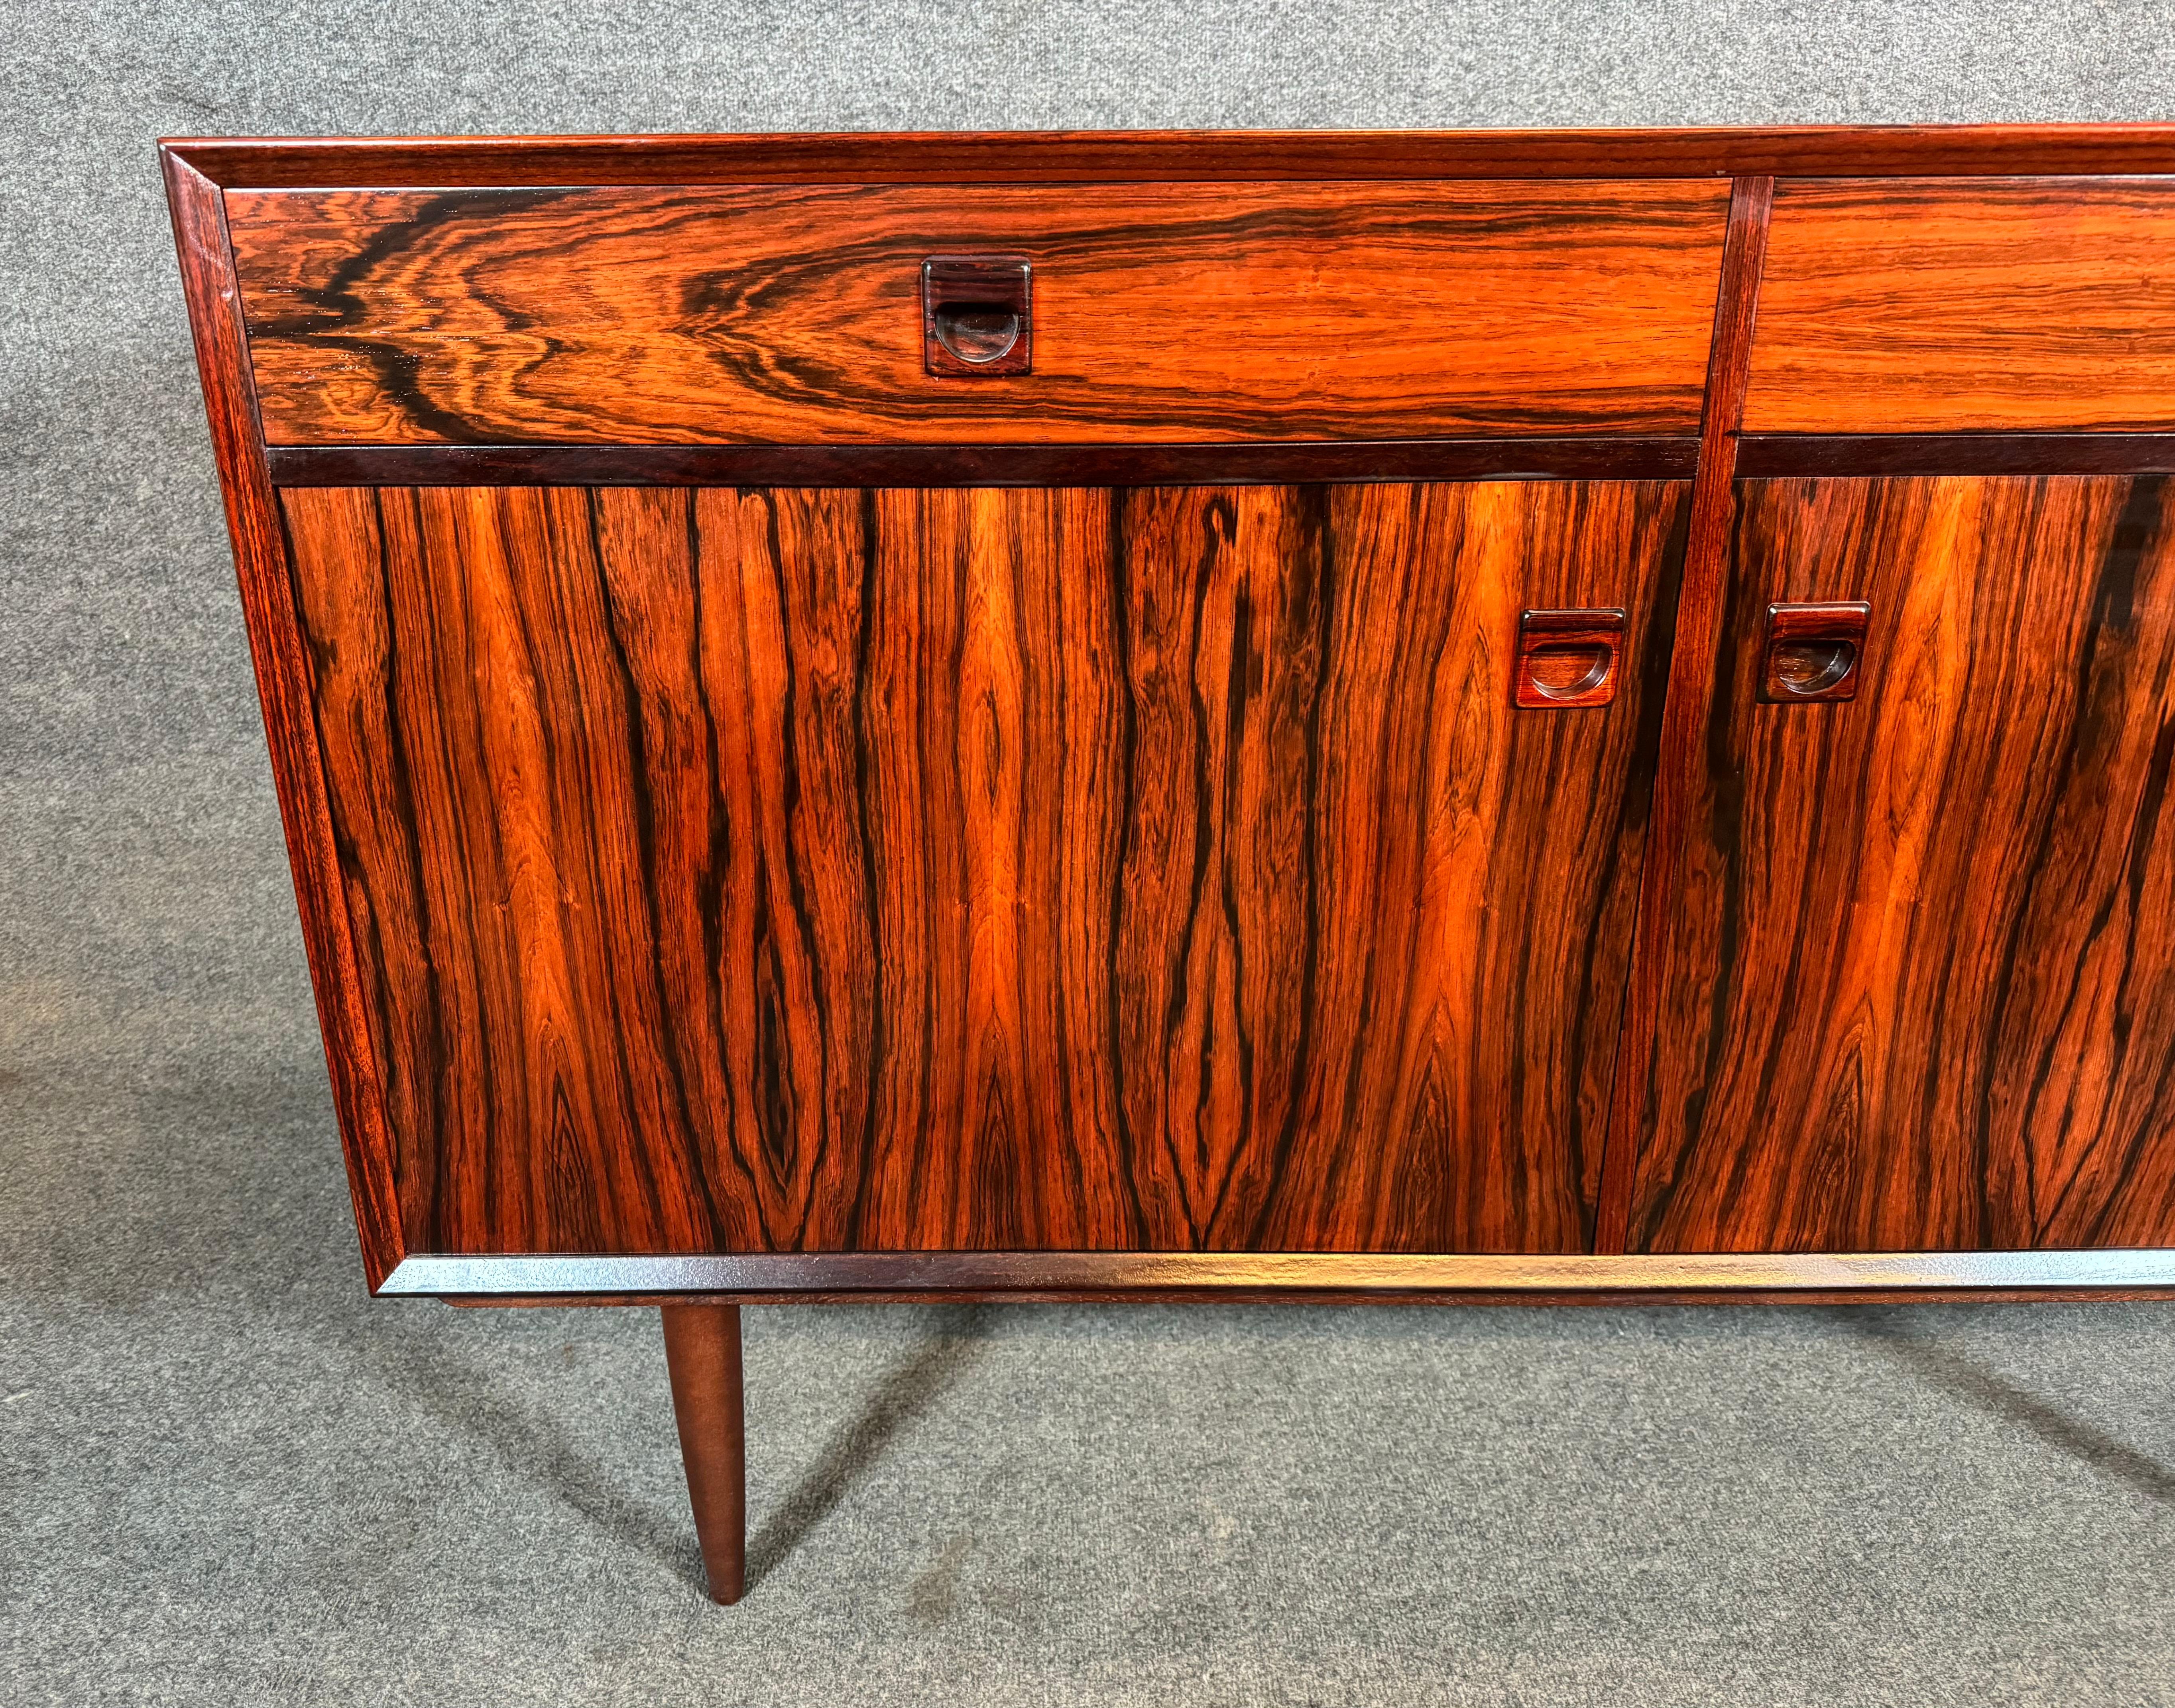 Here is a beautiful scandinavian modern rosewood compact sideboard manufactured by Brouer Mobelfabrik in Denmark in the 1960's. This exquisite piece, recently imported from Europe to California before its refinishing, features a vibrant wood grain,